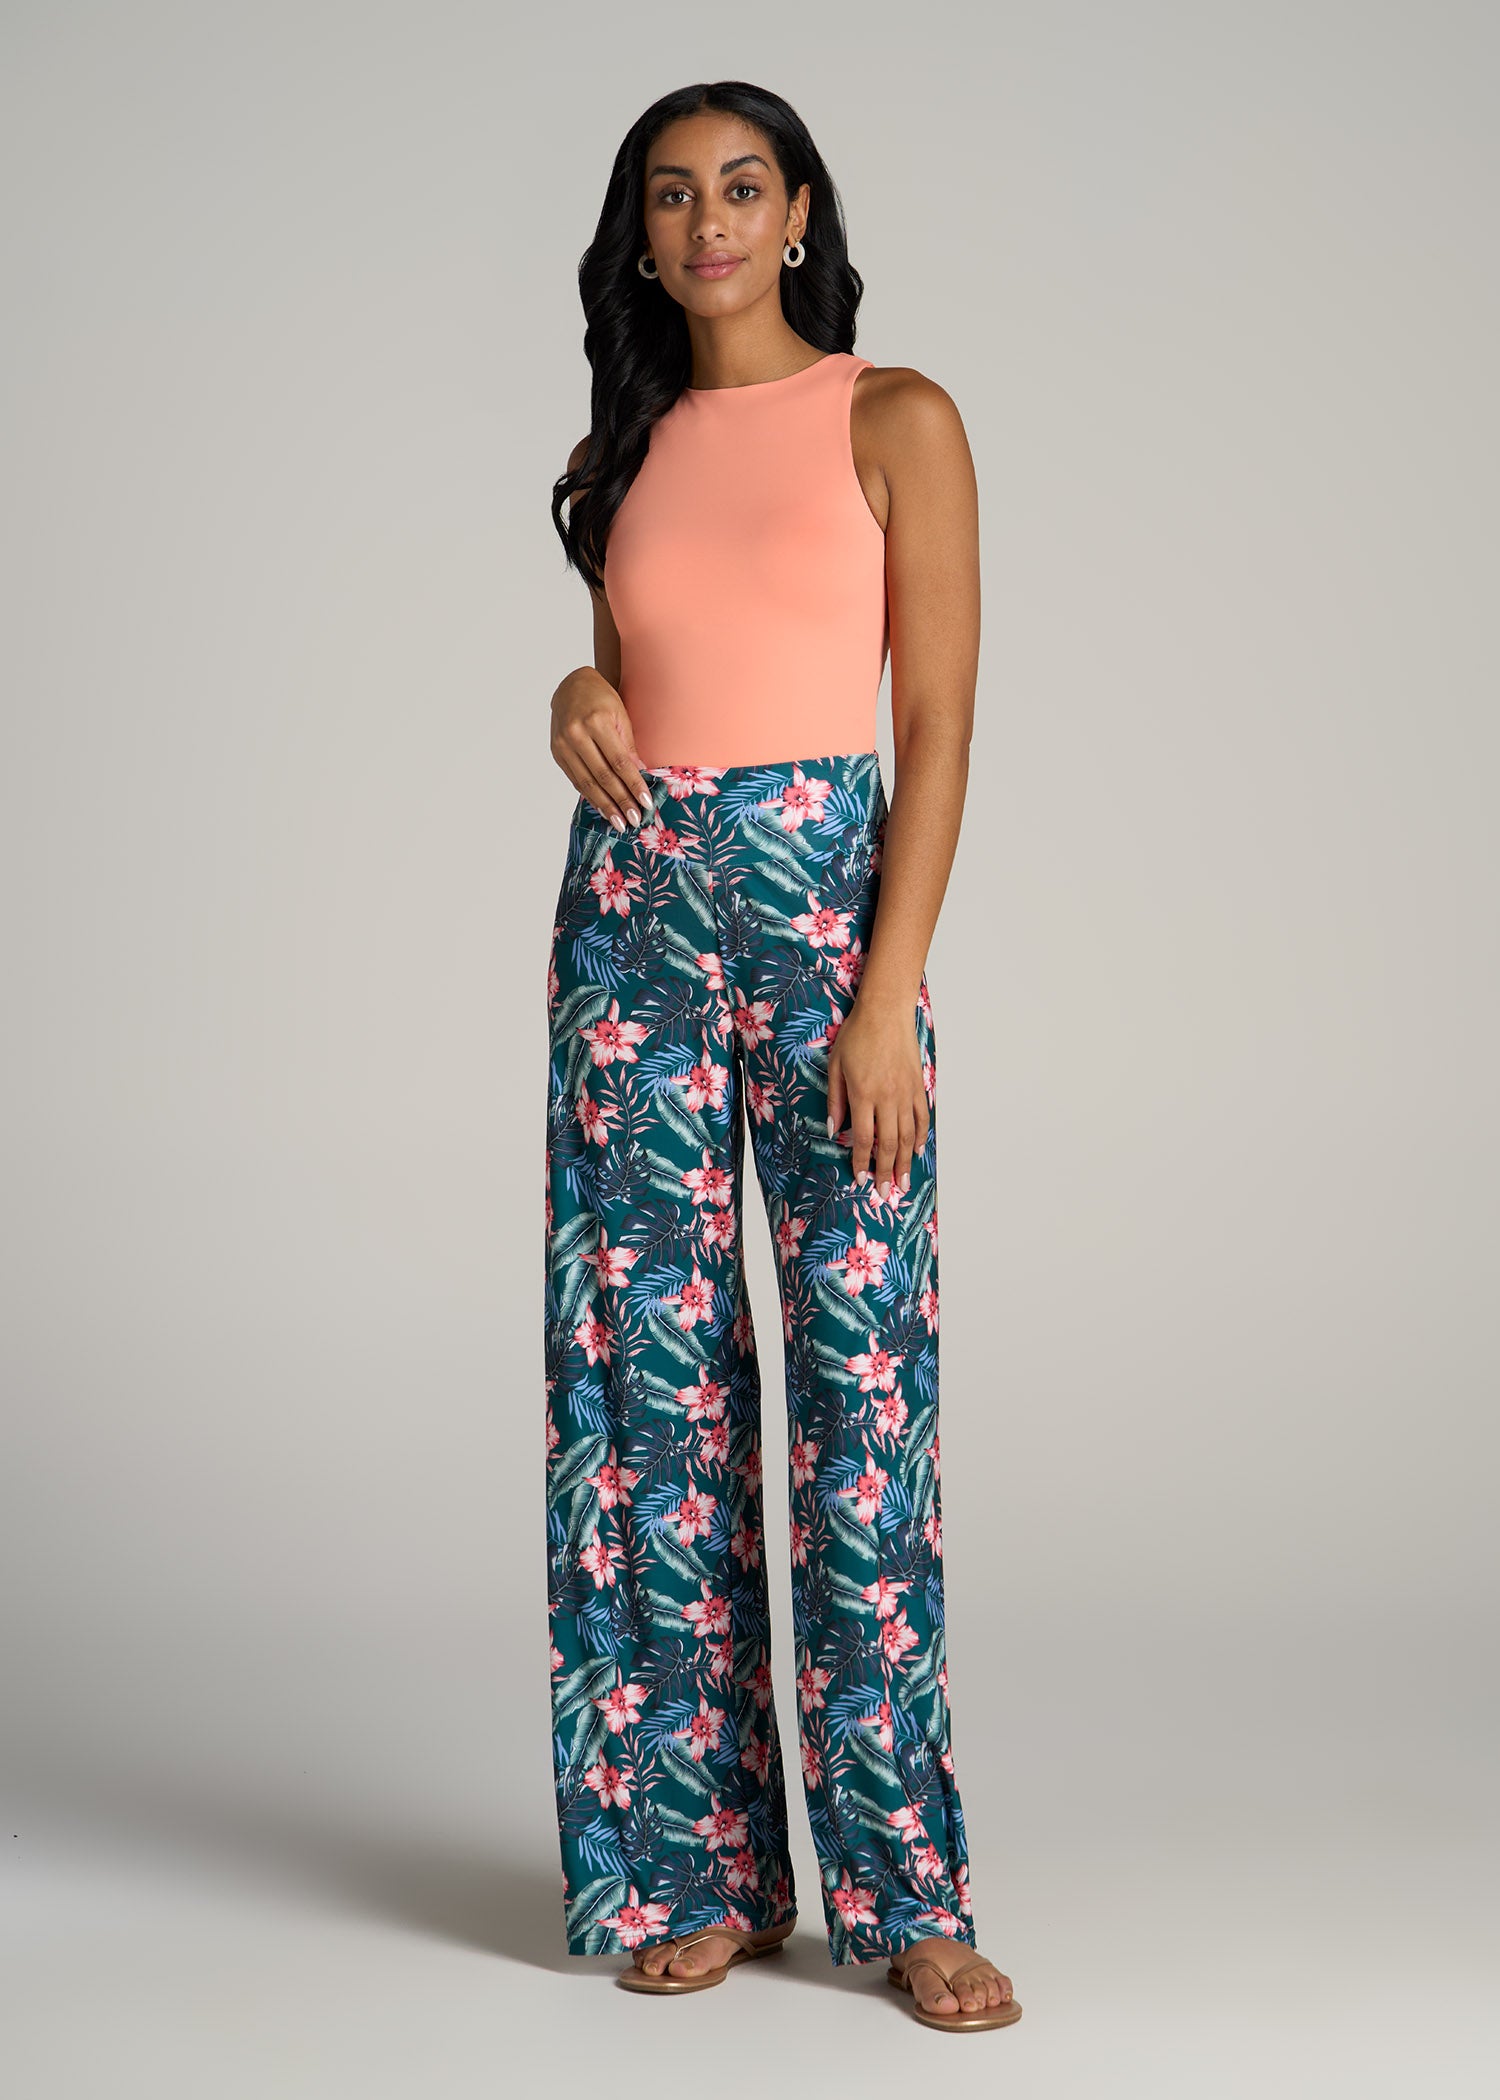 Pull On Breezy Wide Leg Pants for Tall Women | American Tall